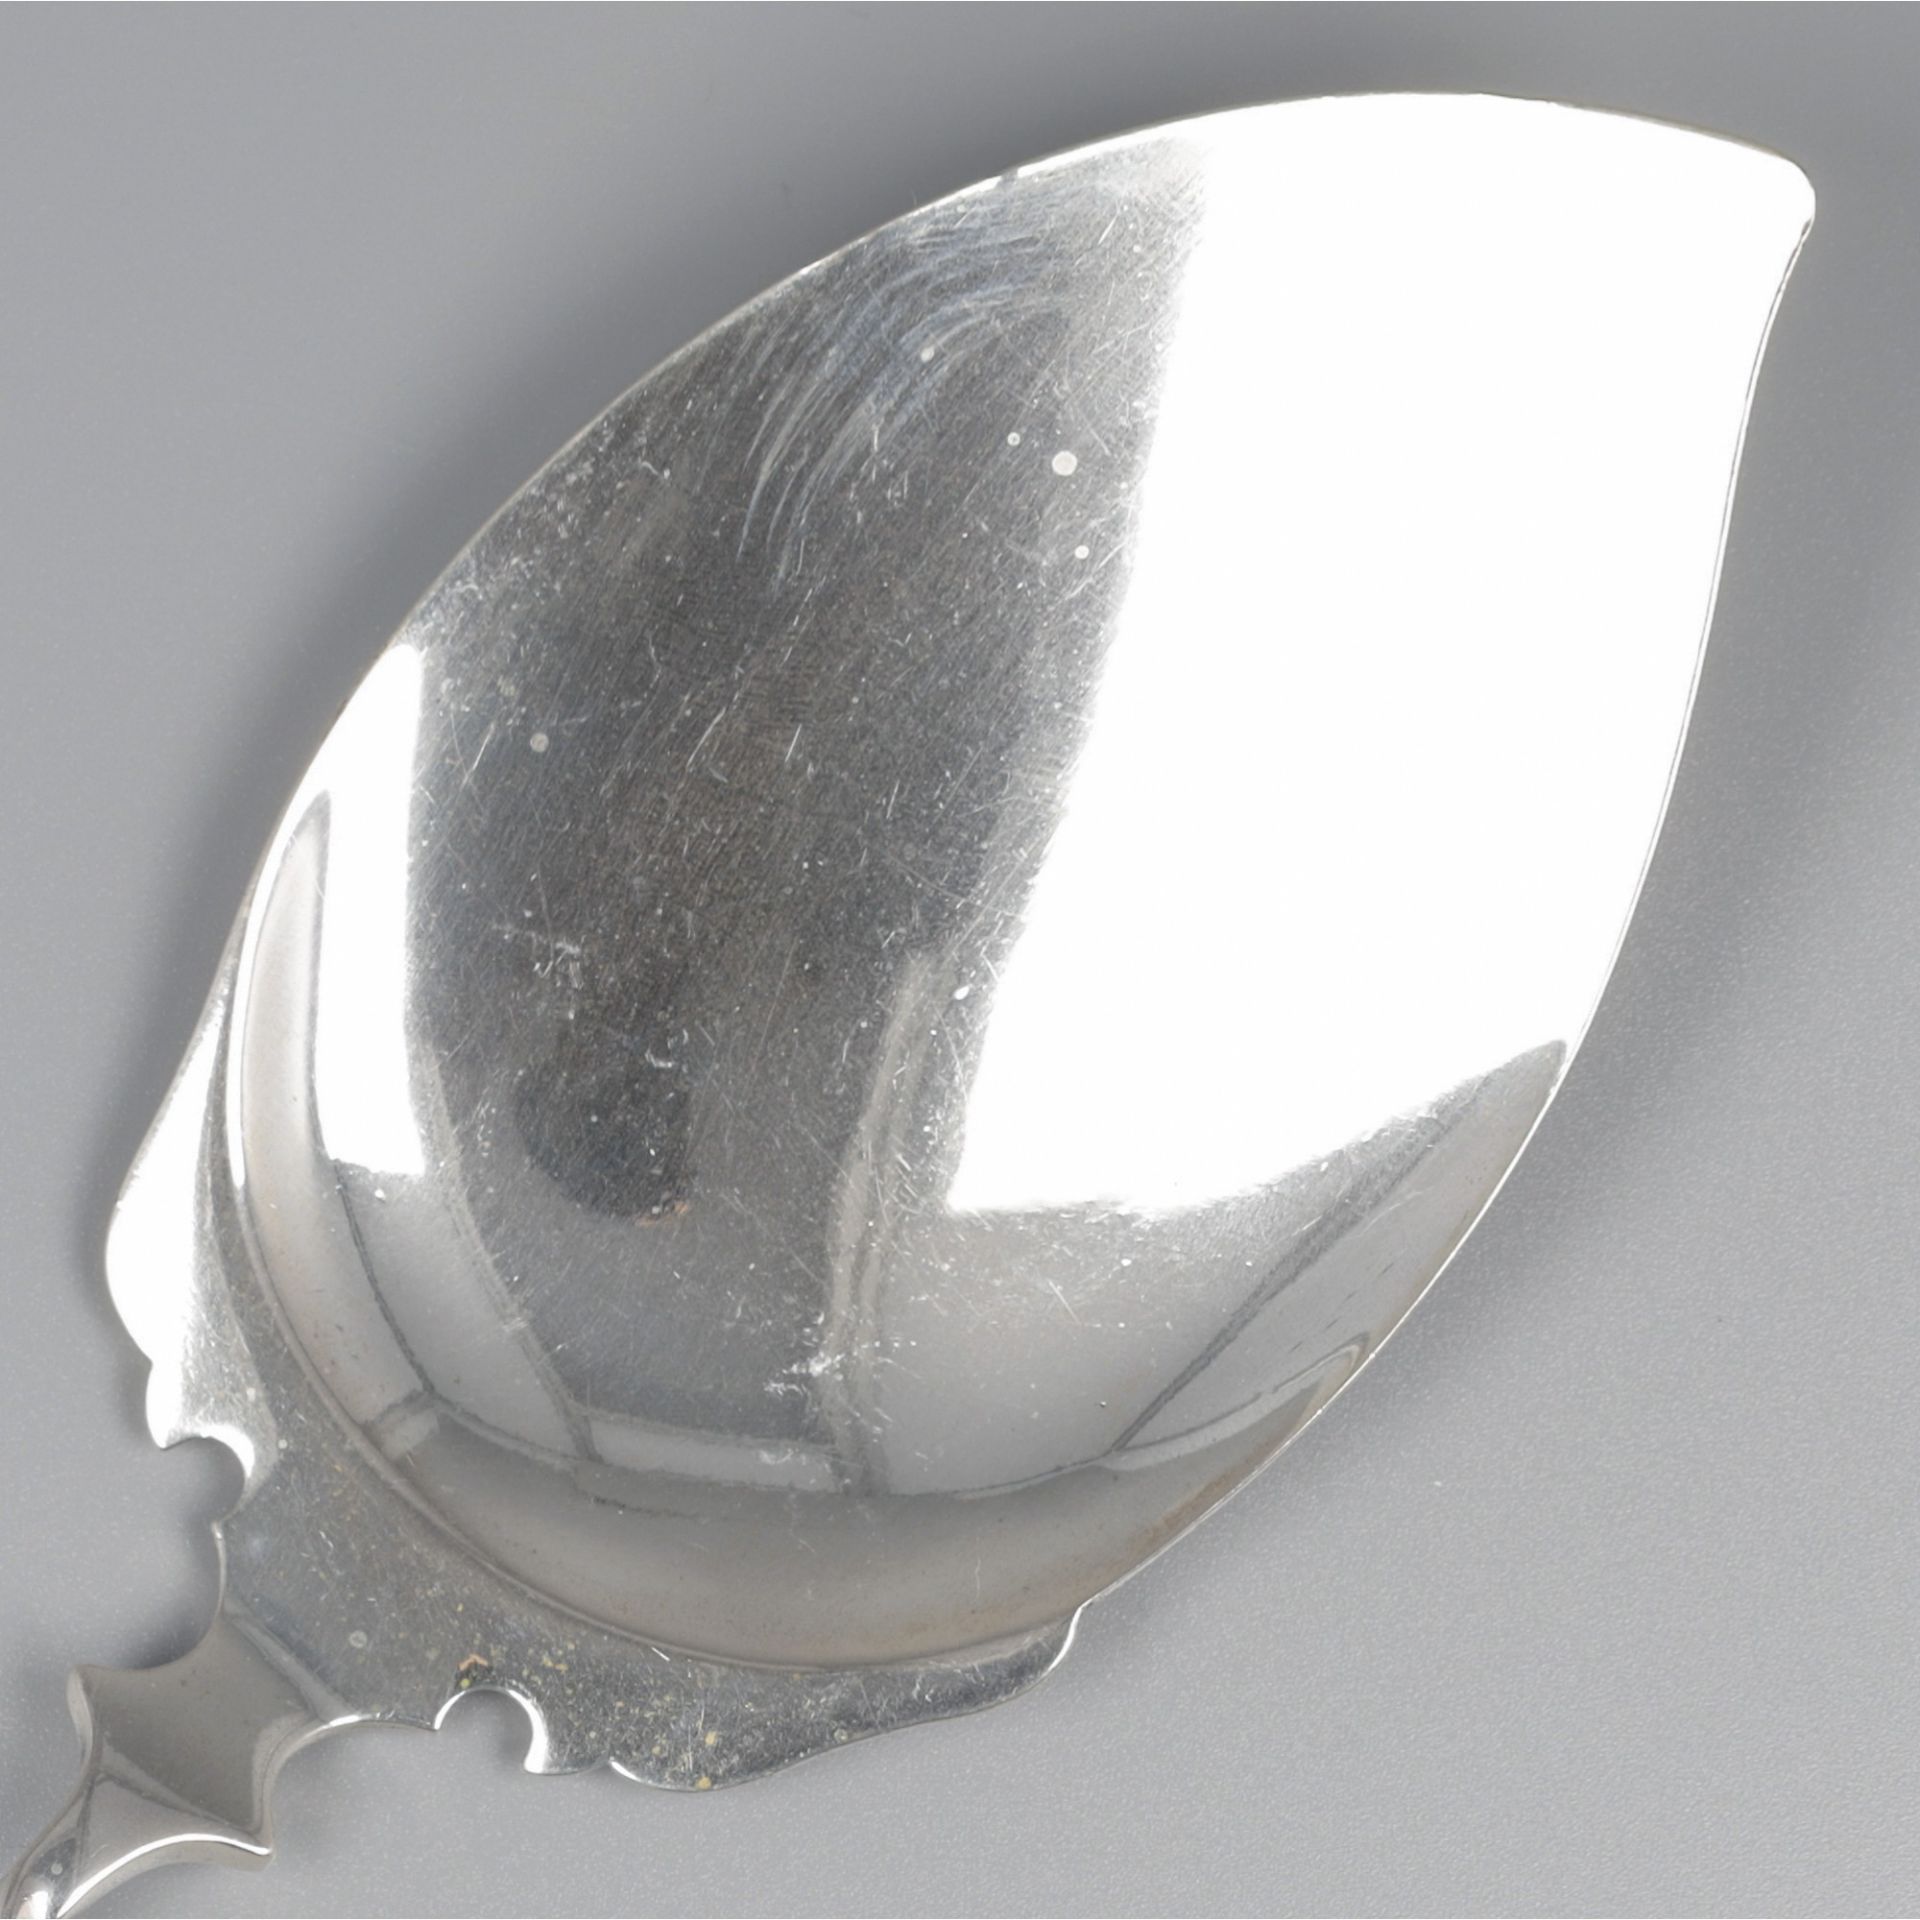 No reserve - Pastry scoop silver. - Image 2 of 5